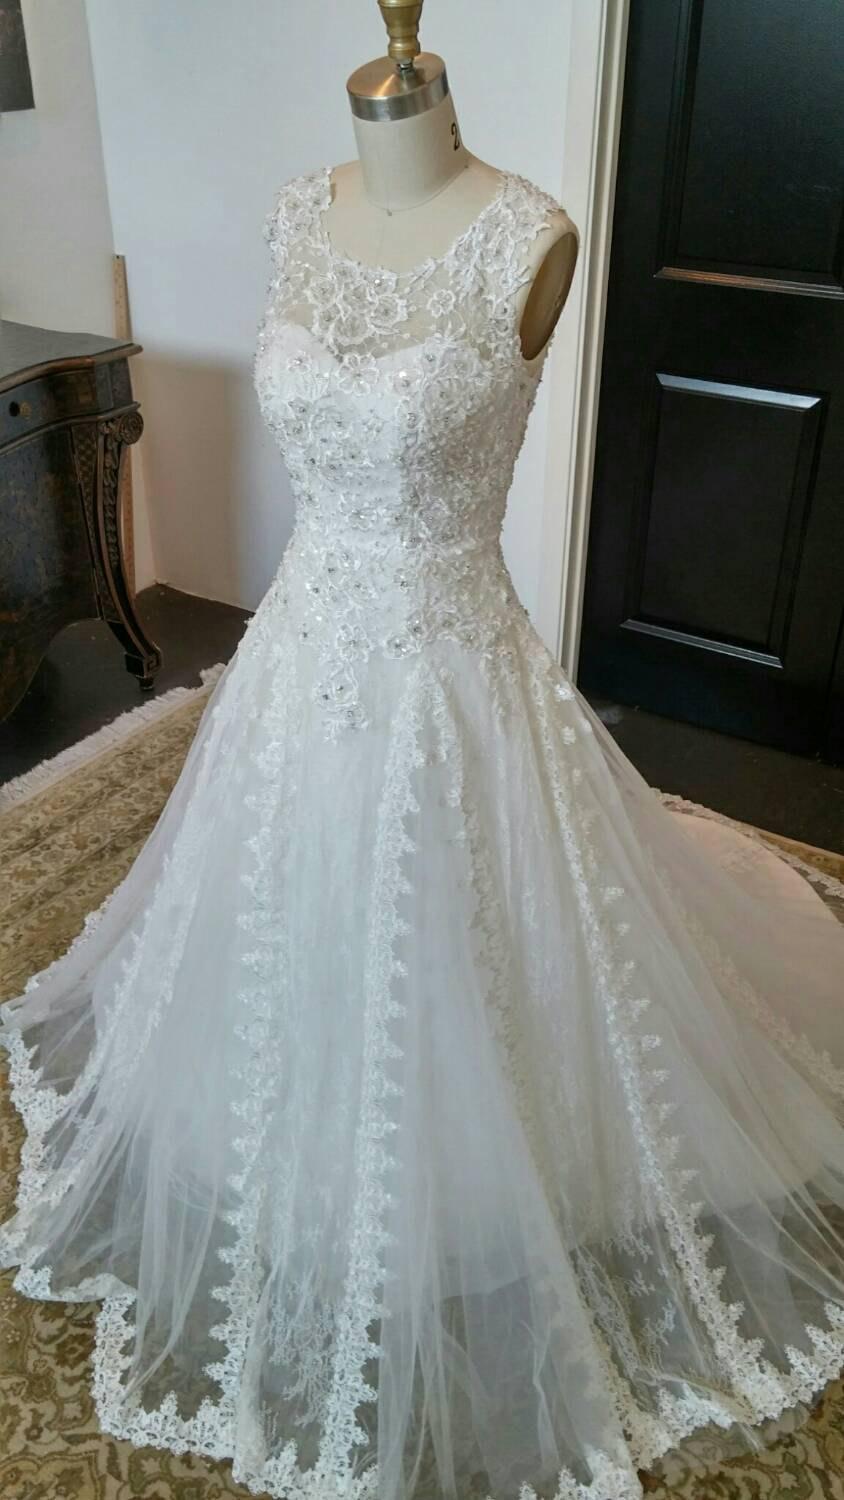 Stunning Beaded And Embellished A-Line Wedding Dress, Lace ...